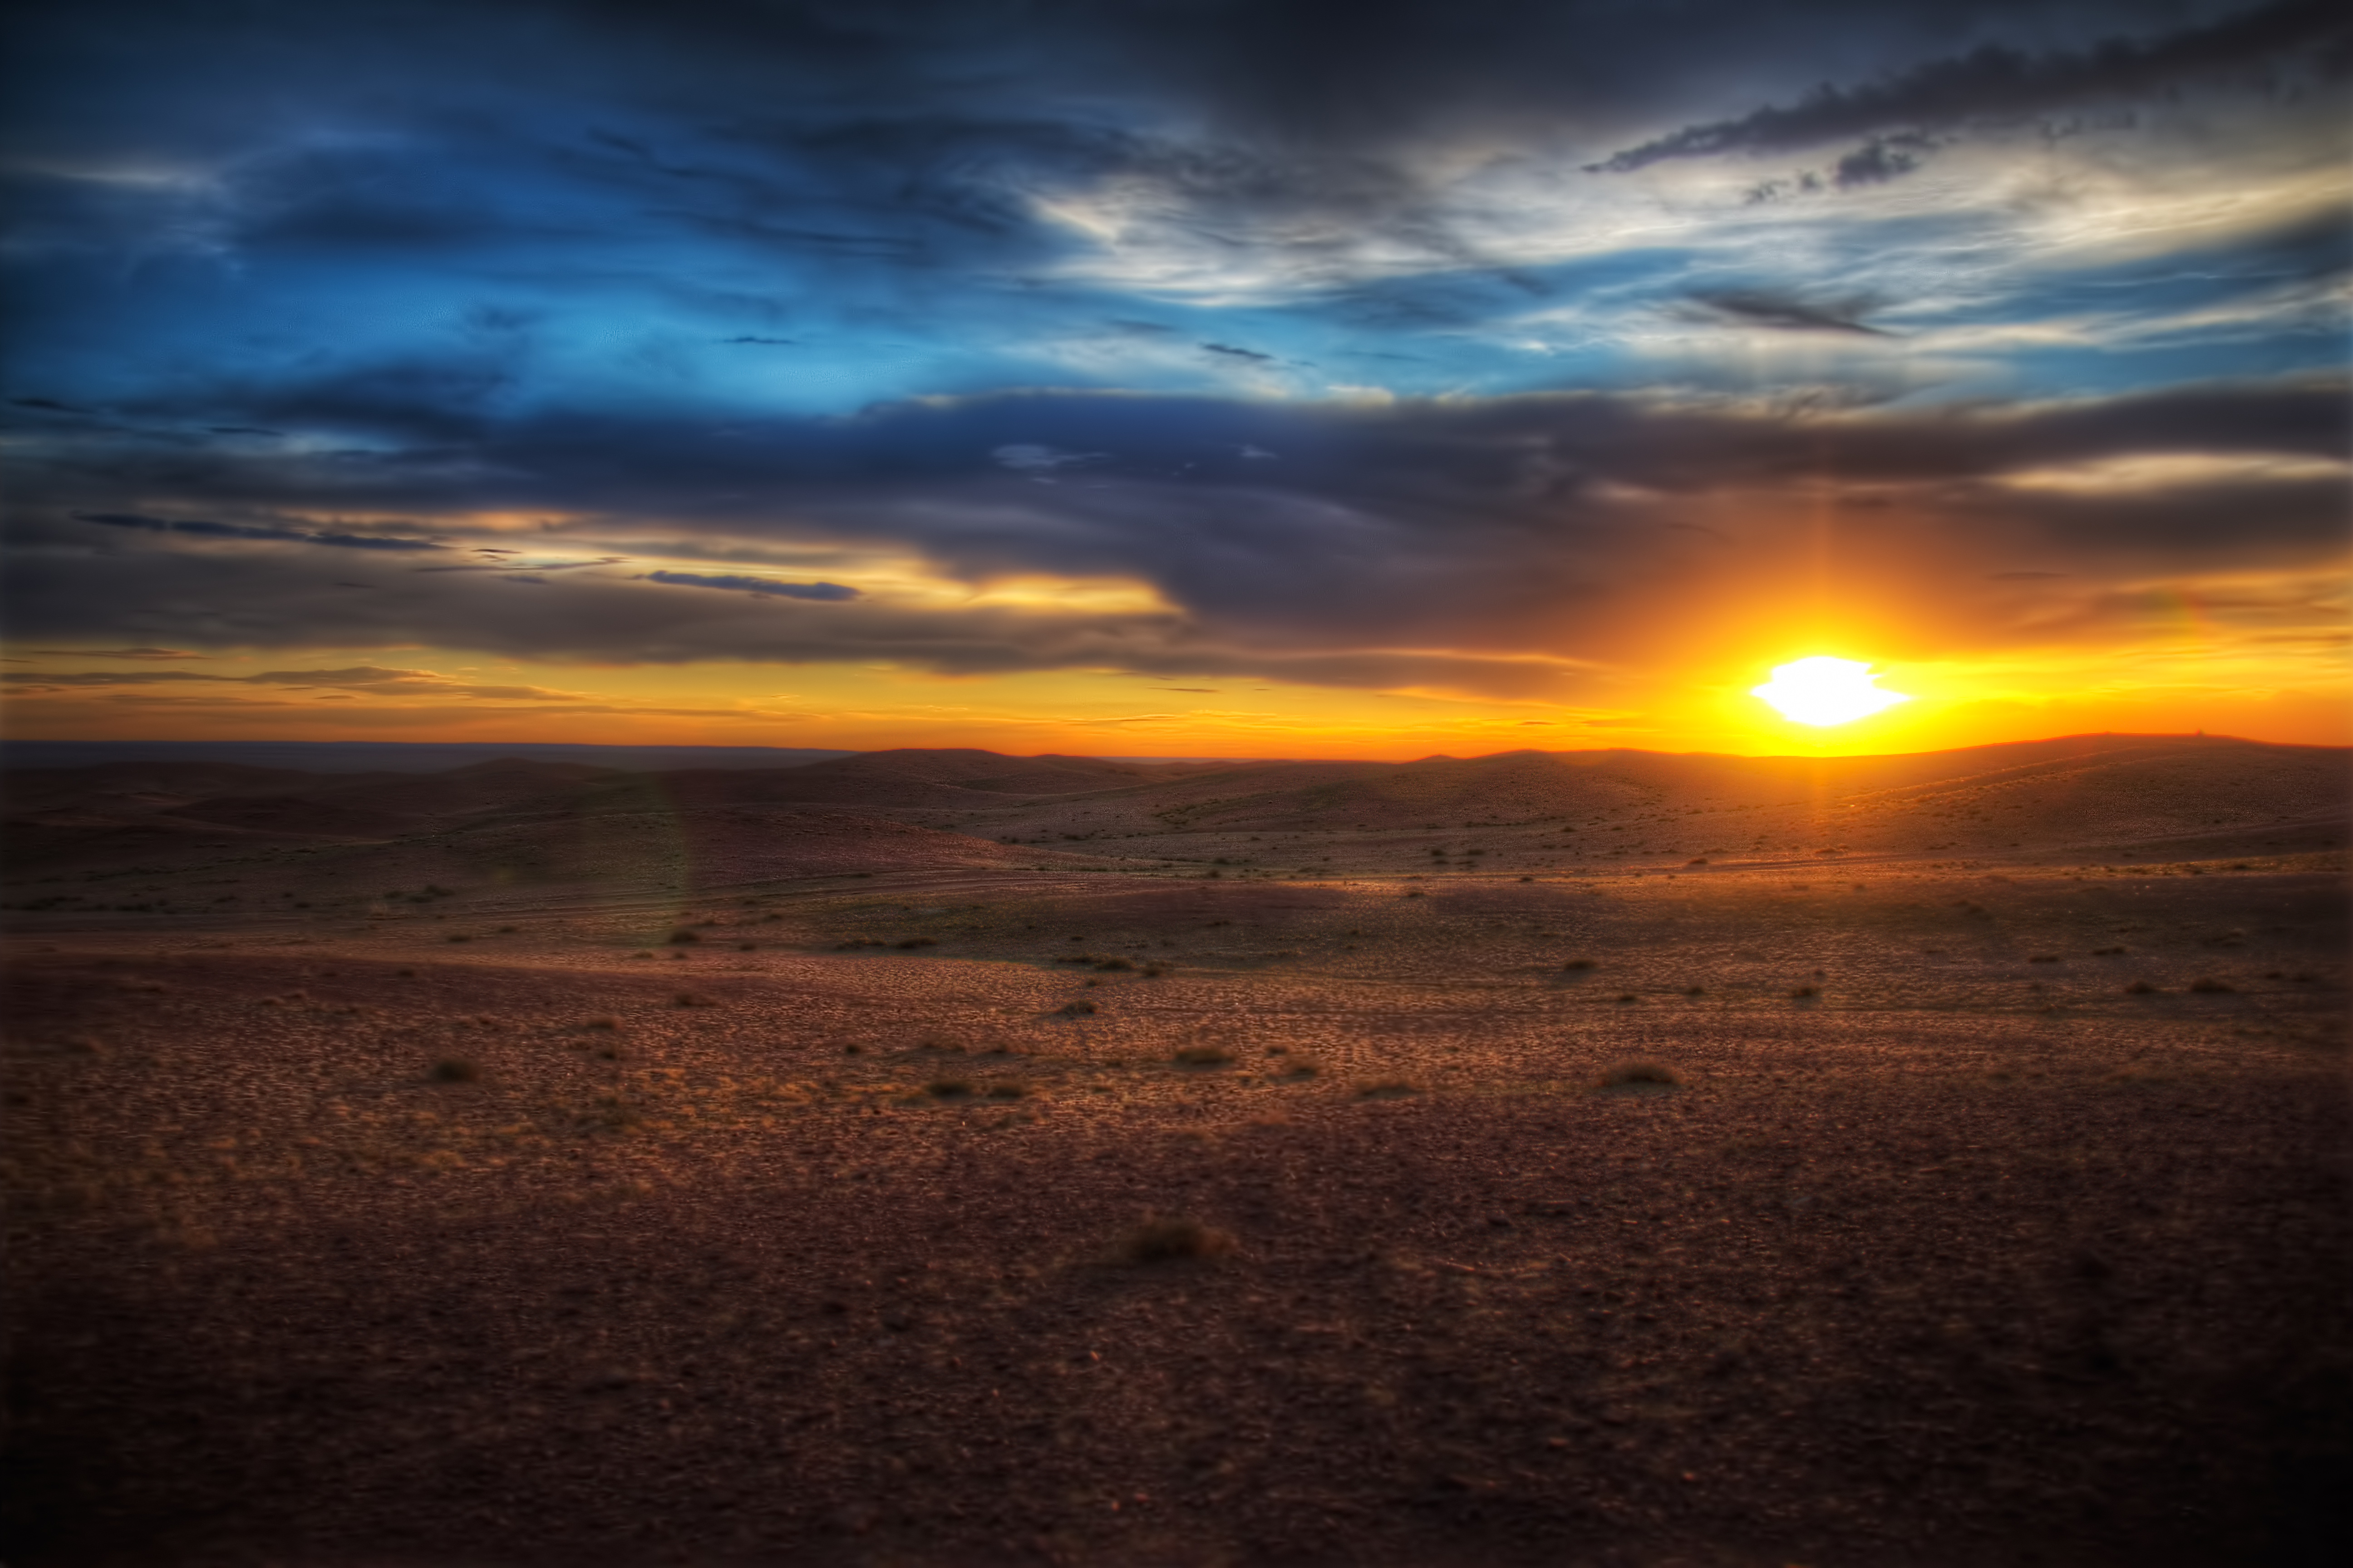 Sunrise In The Deserts Wallpaper Background Sahara Desert Sunset Hd  Photography Photo Sky Background Image And Wallpaper for Free Download